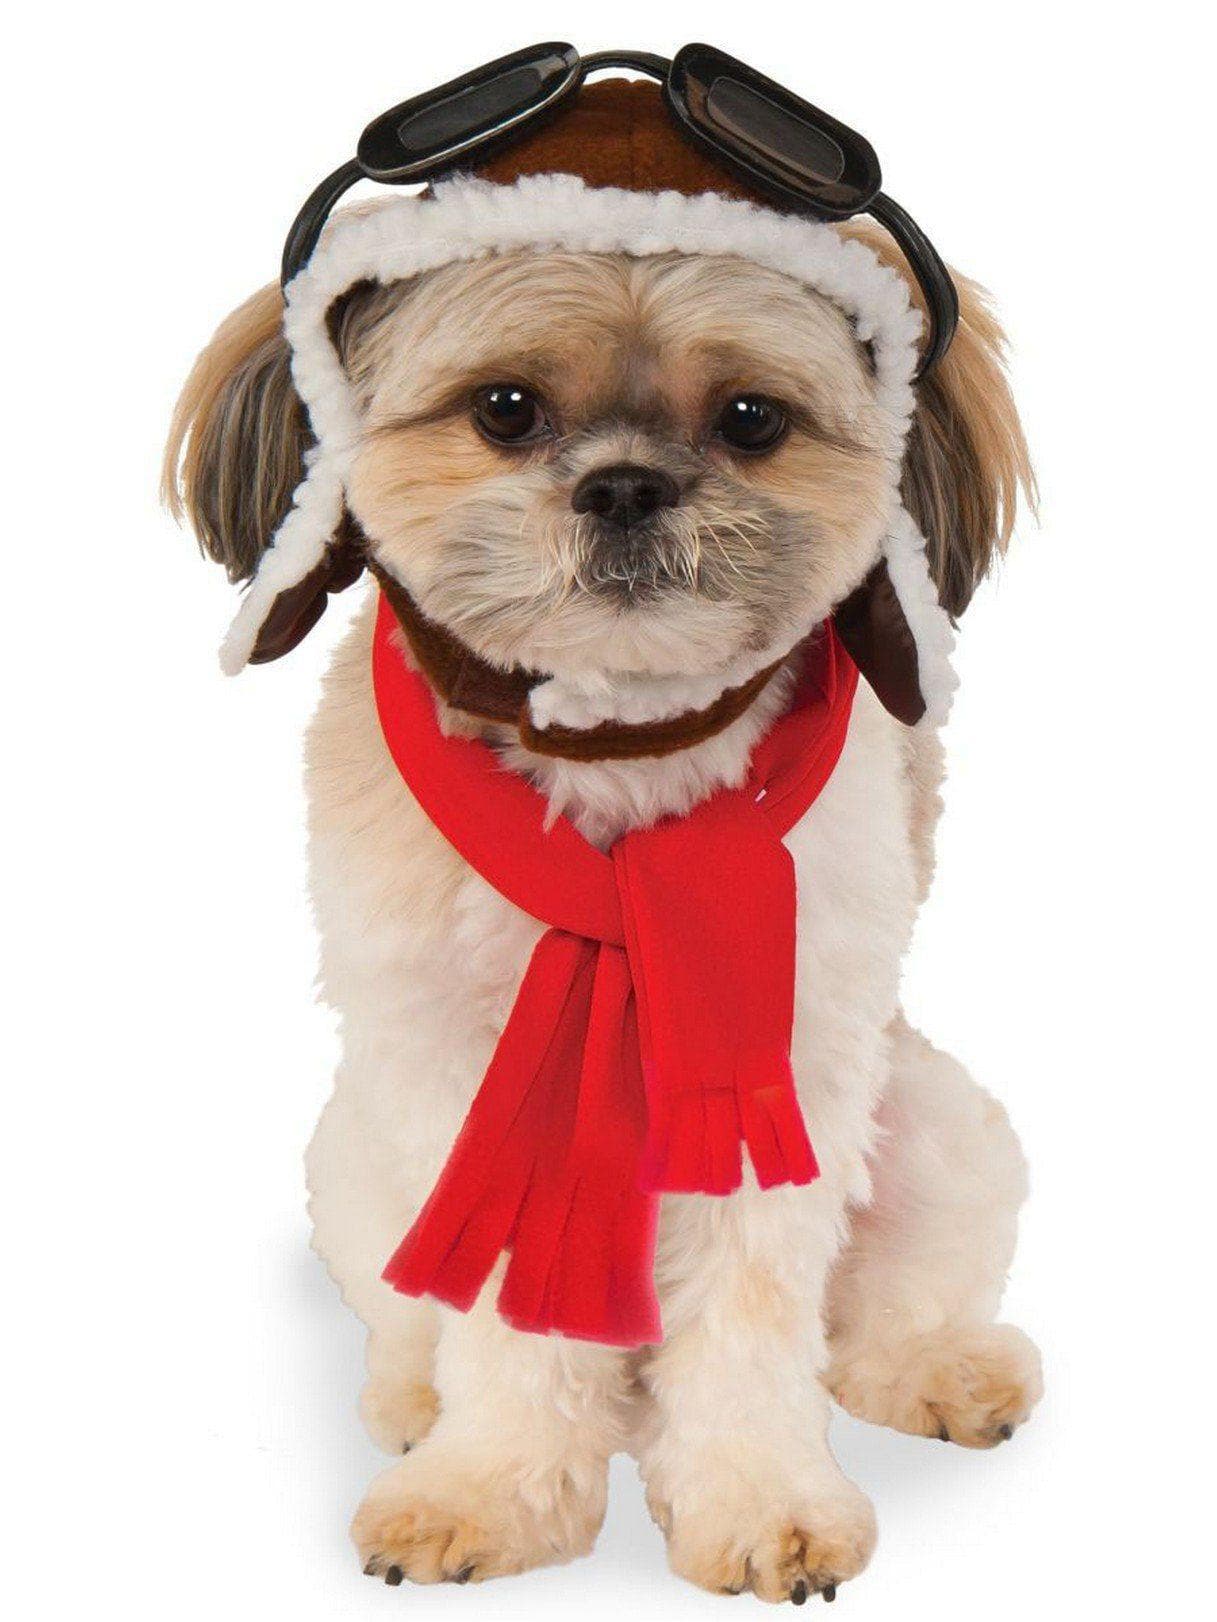 Flying High Aviator Pet Hat and Scarf Set - costumes.com